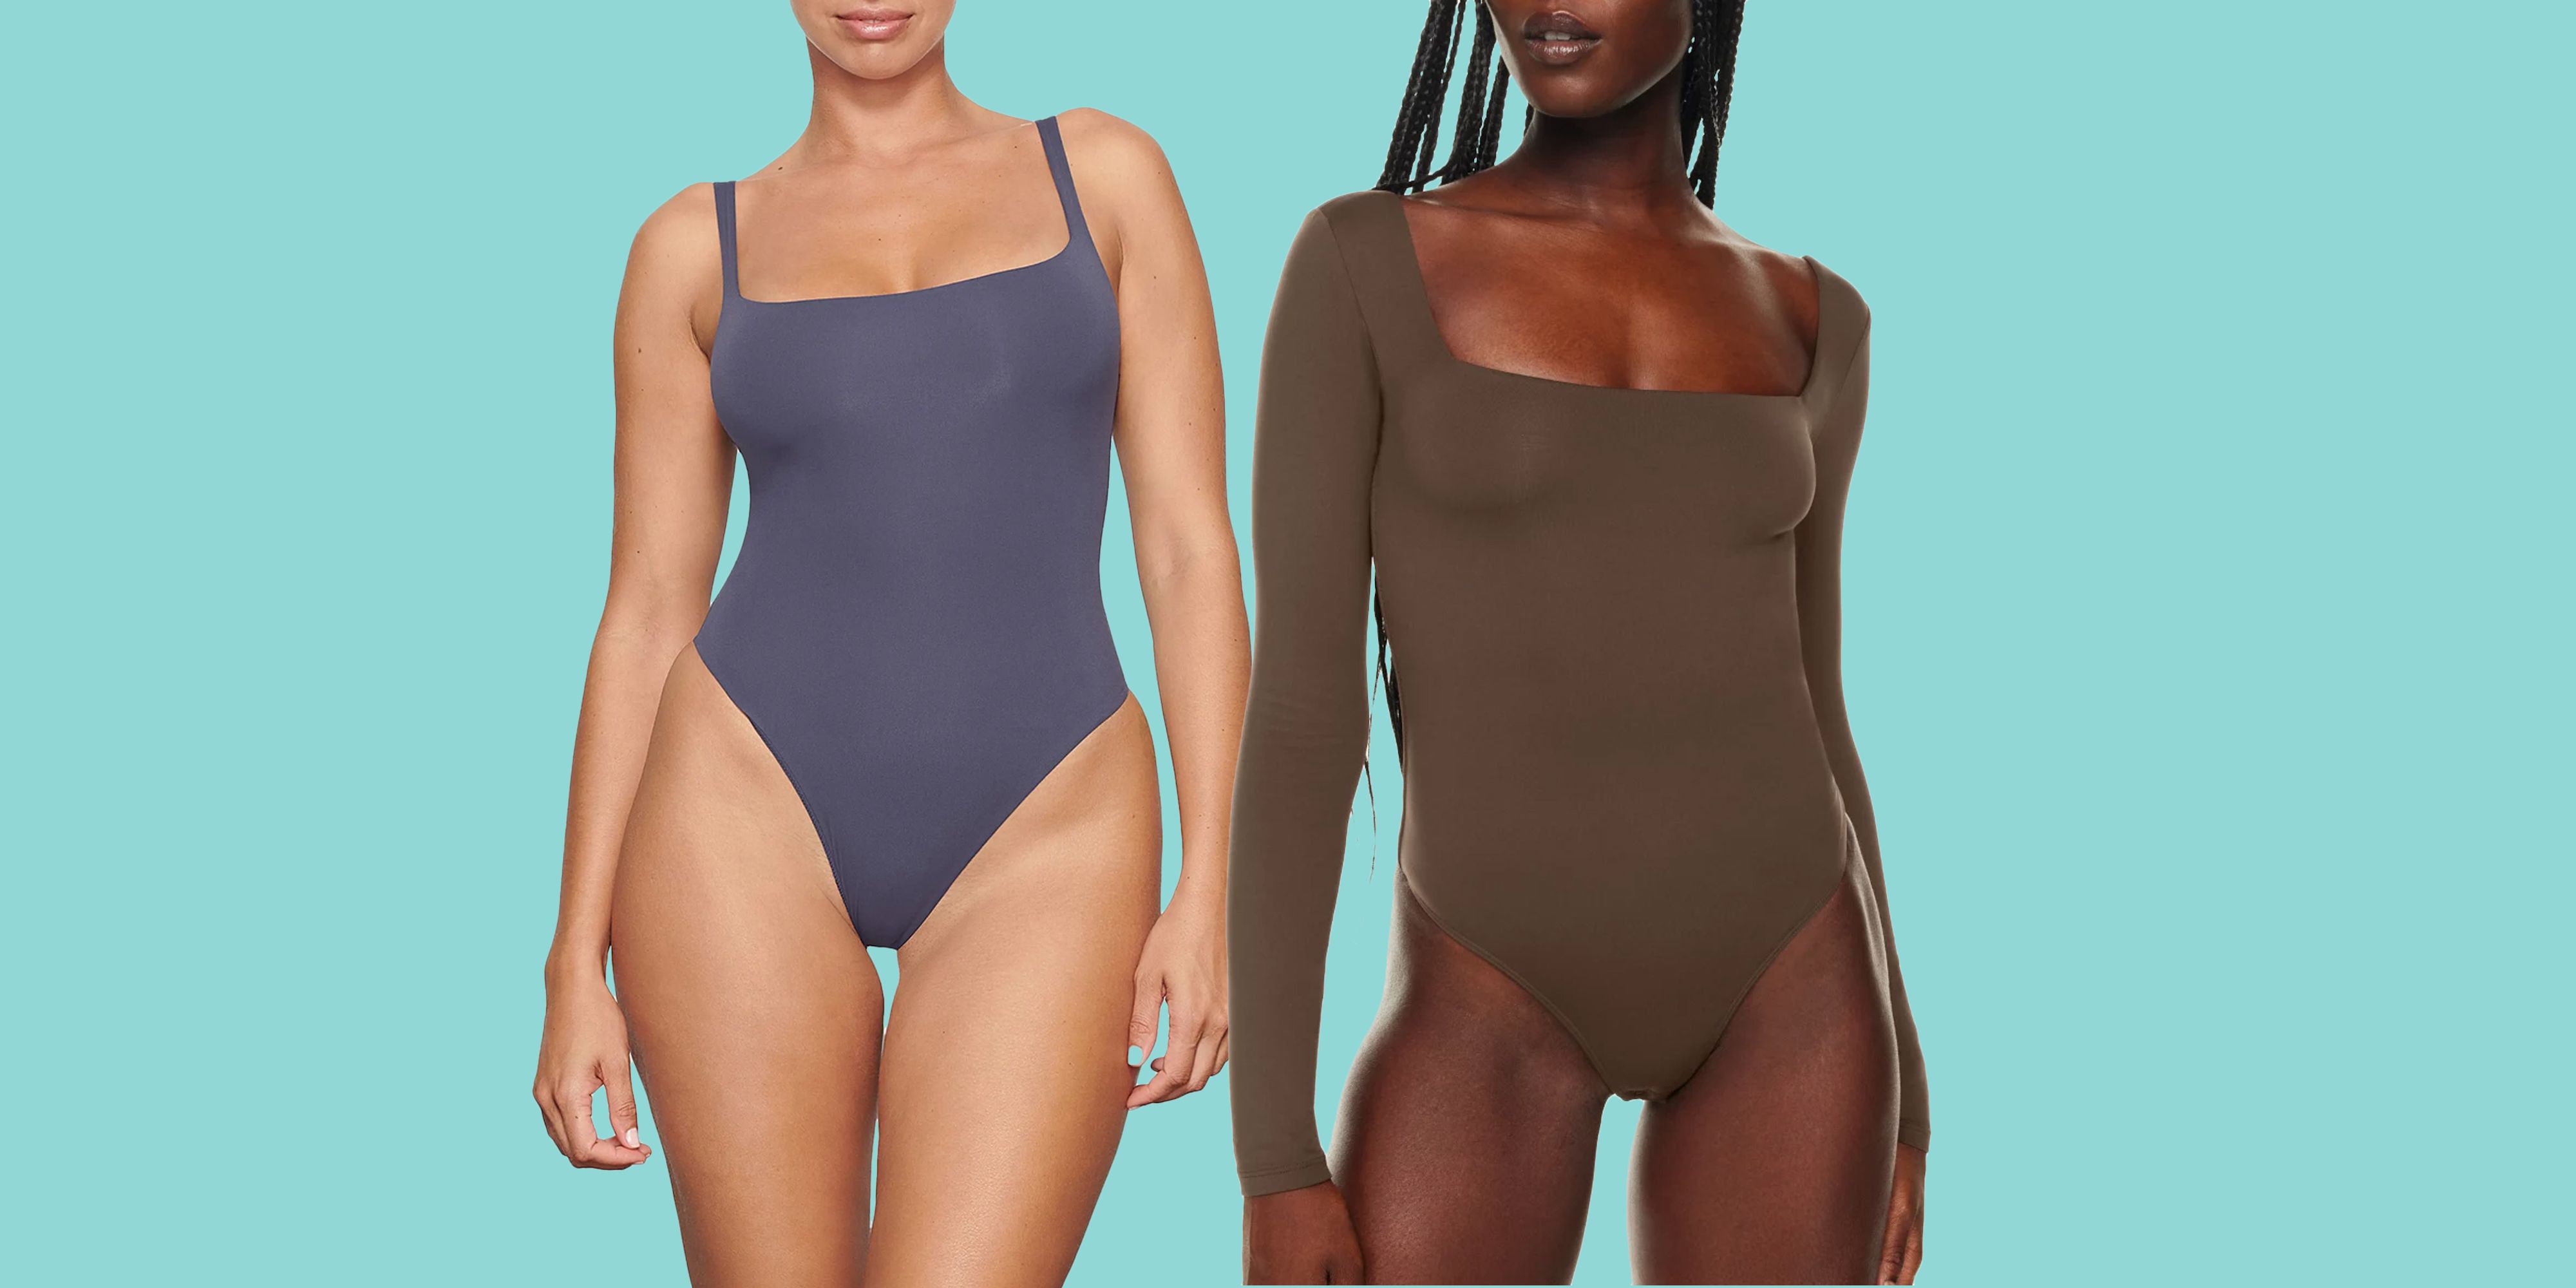 Finally got to try the viral bodysuits from ! Super